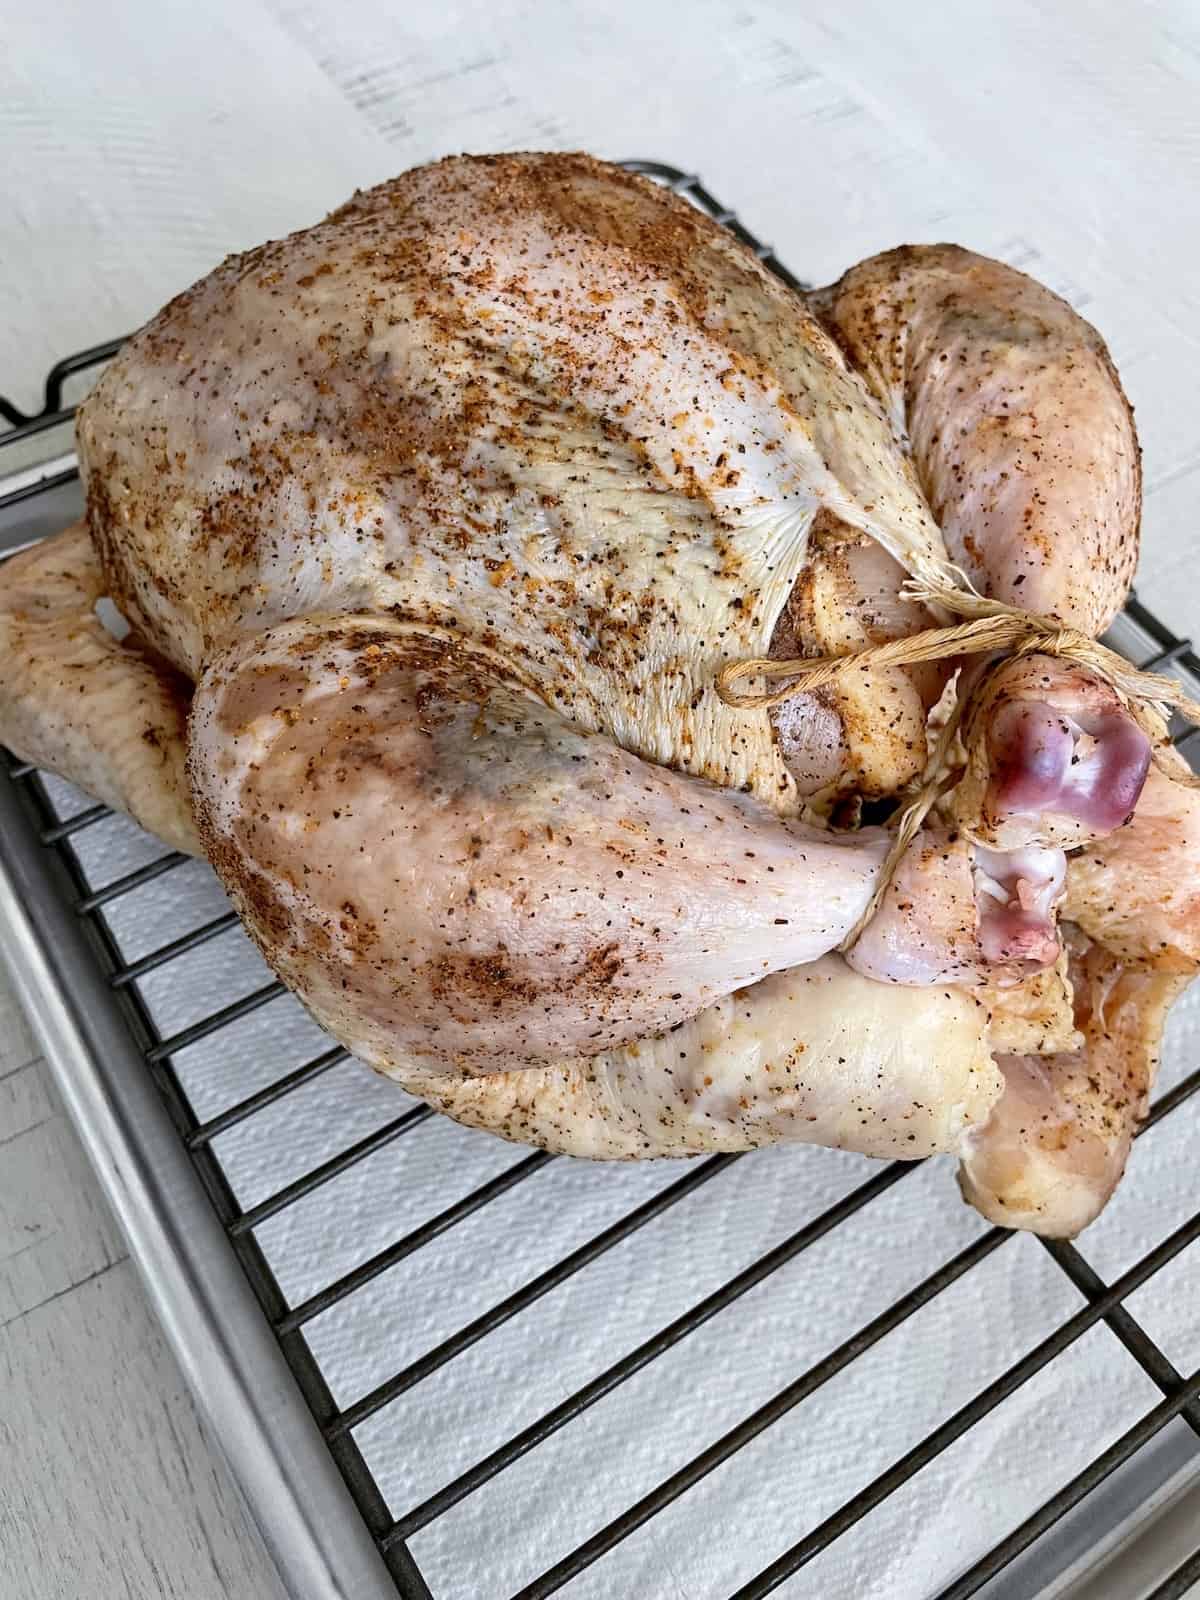 a dry brined chicken on a sheet pan with a wire rack showing the transformation of color and texture